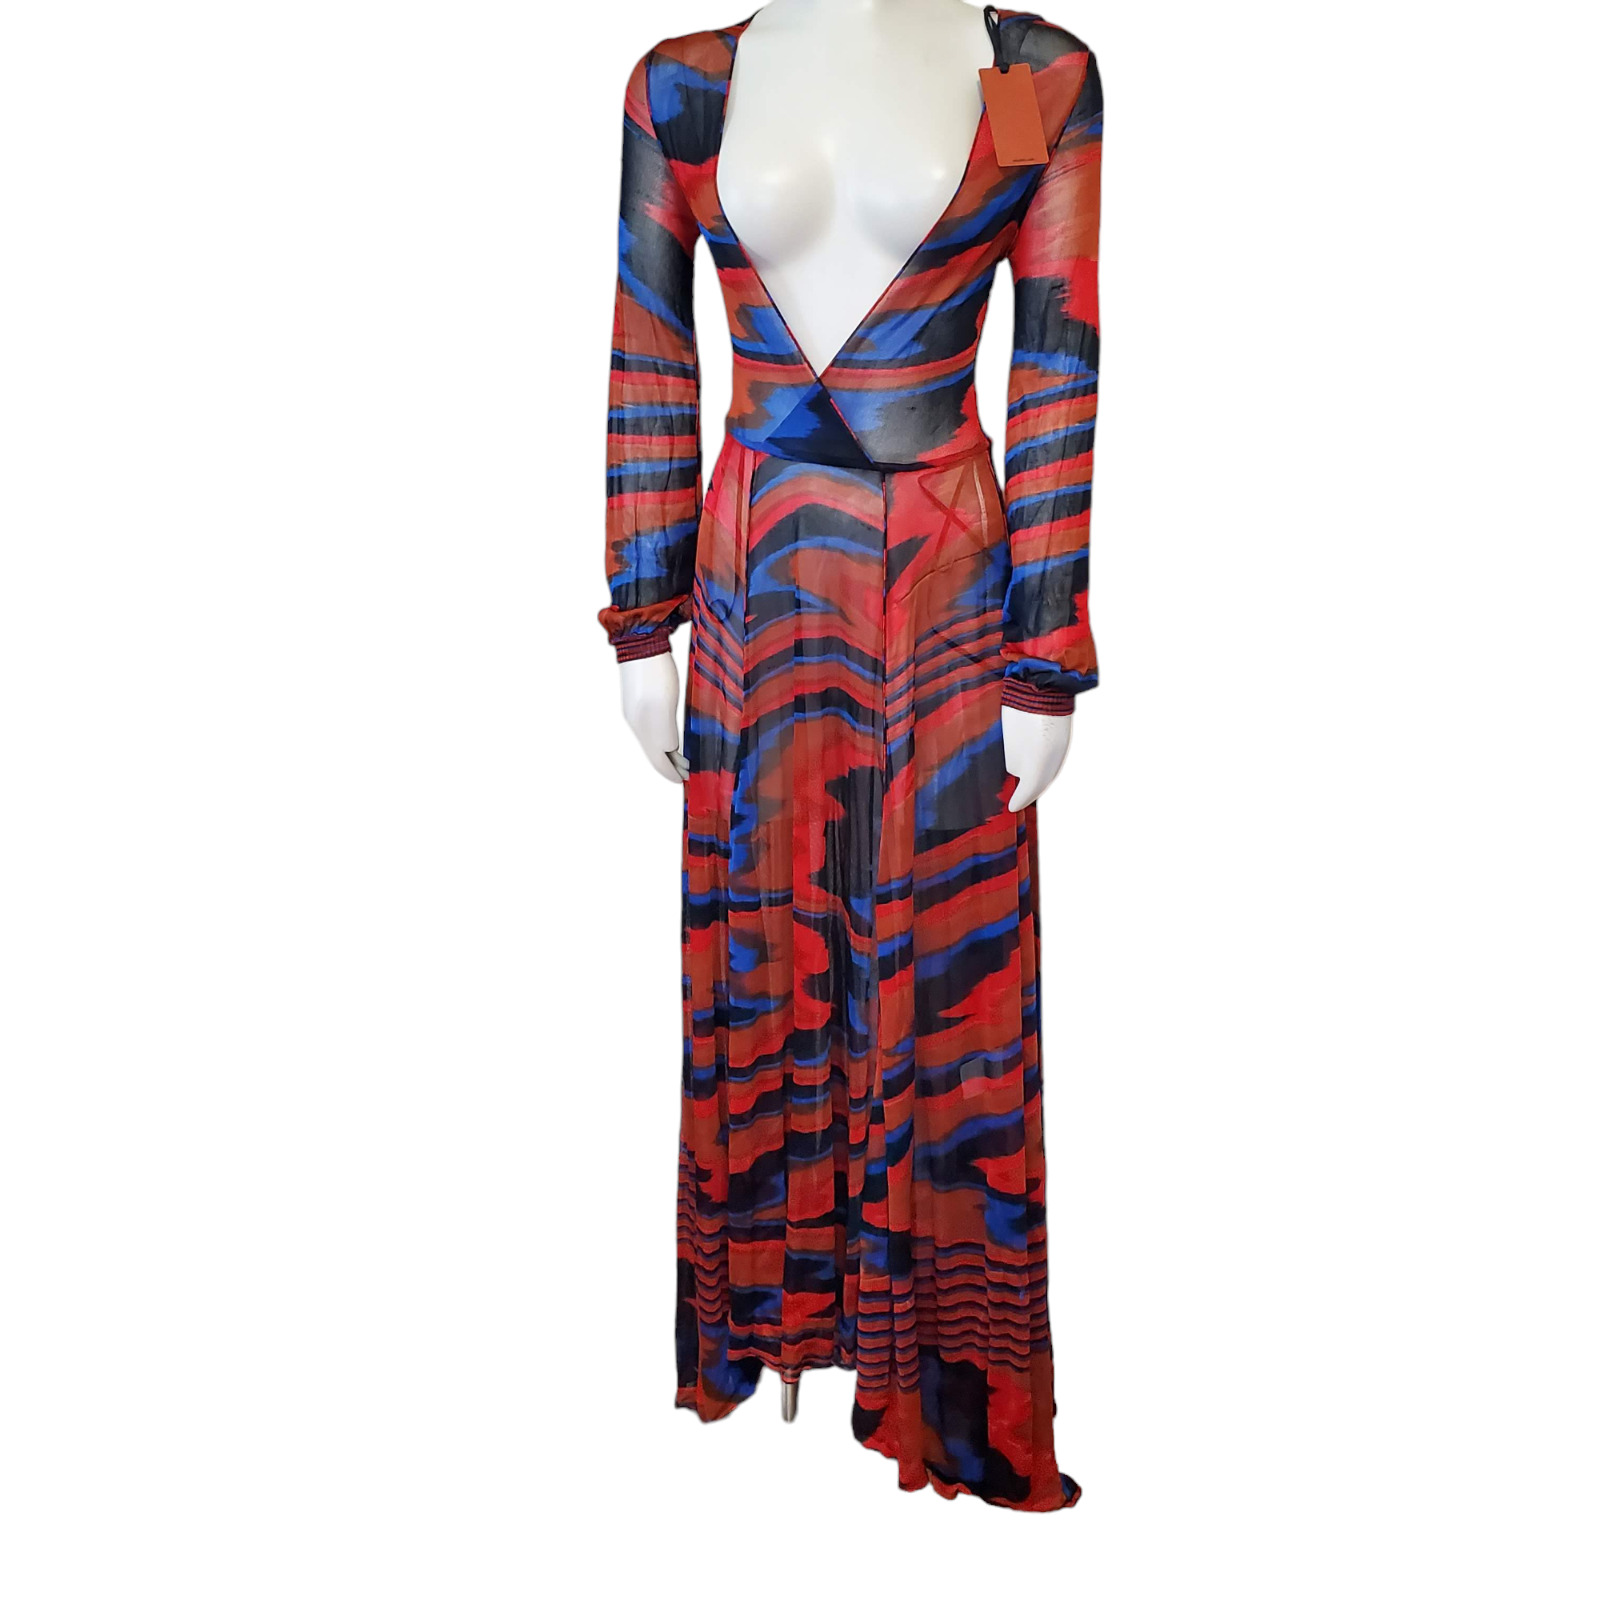 MISSONI Plunge space dye maxi dress Size 40/4 Sheer mesh Italy New with Flaws